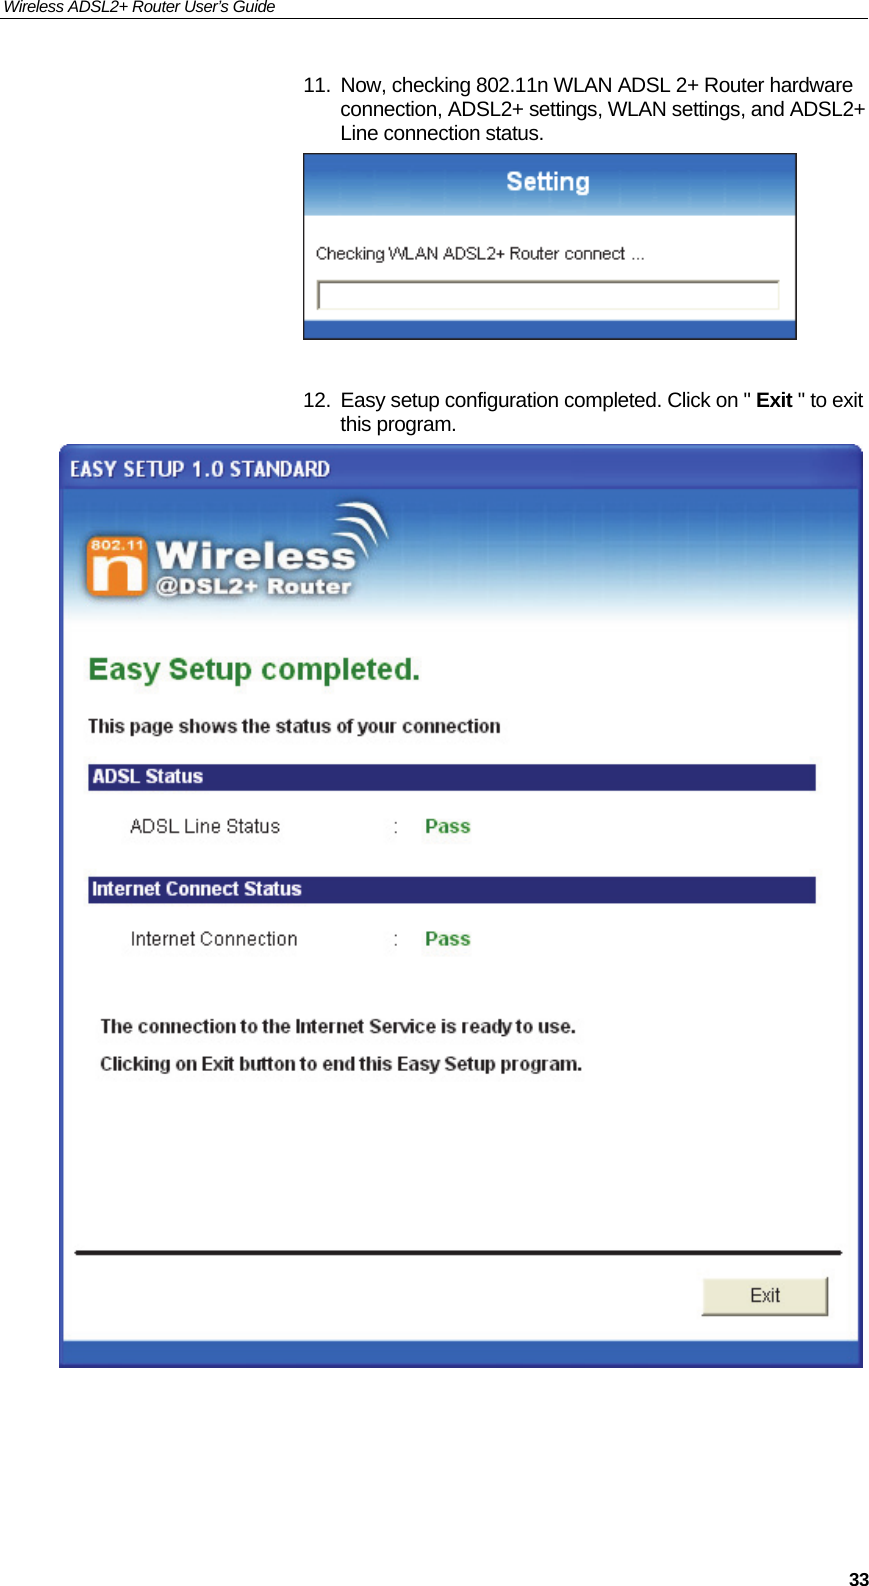 Wireless ADSL2+ Router User’s Guide     3311.  Now, checking 802.11n WLAN ADSL 2+ Router hardware connection, ADSL2+ settings, WLAN settings, and ADSL2+ Line connection status.   12.  Easy setup configuration completed. Click on &quot; Exit &quot; to exit this program.      